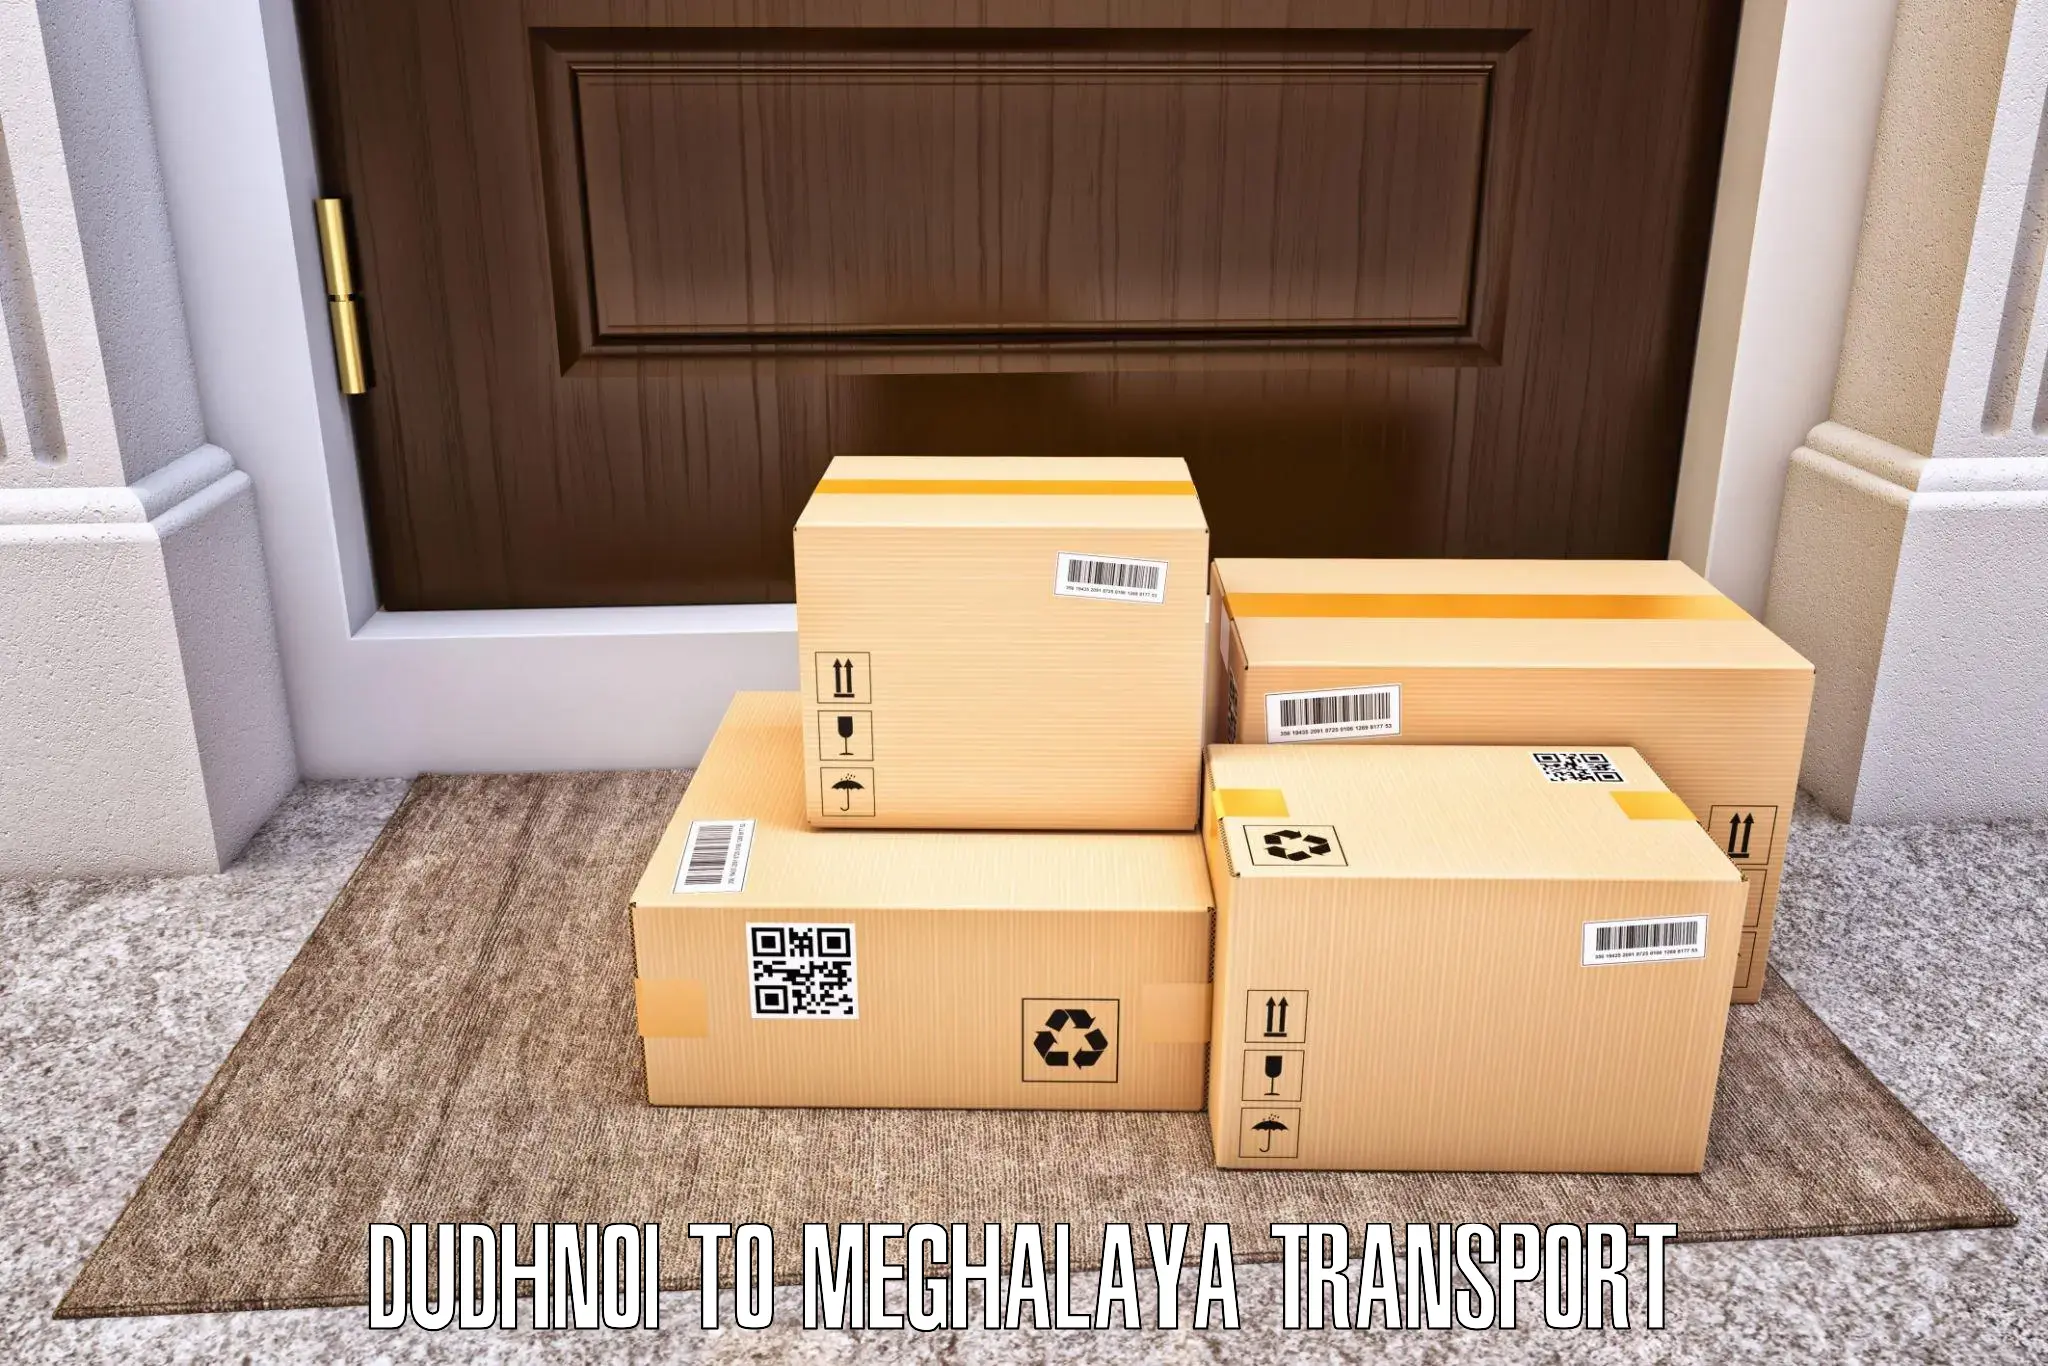 Vehicle transport services in Dudhnoi to Umsaw